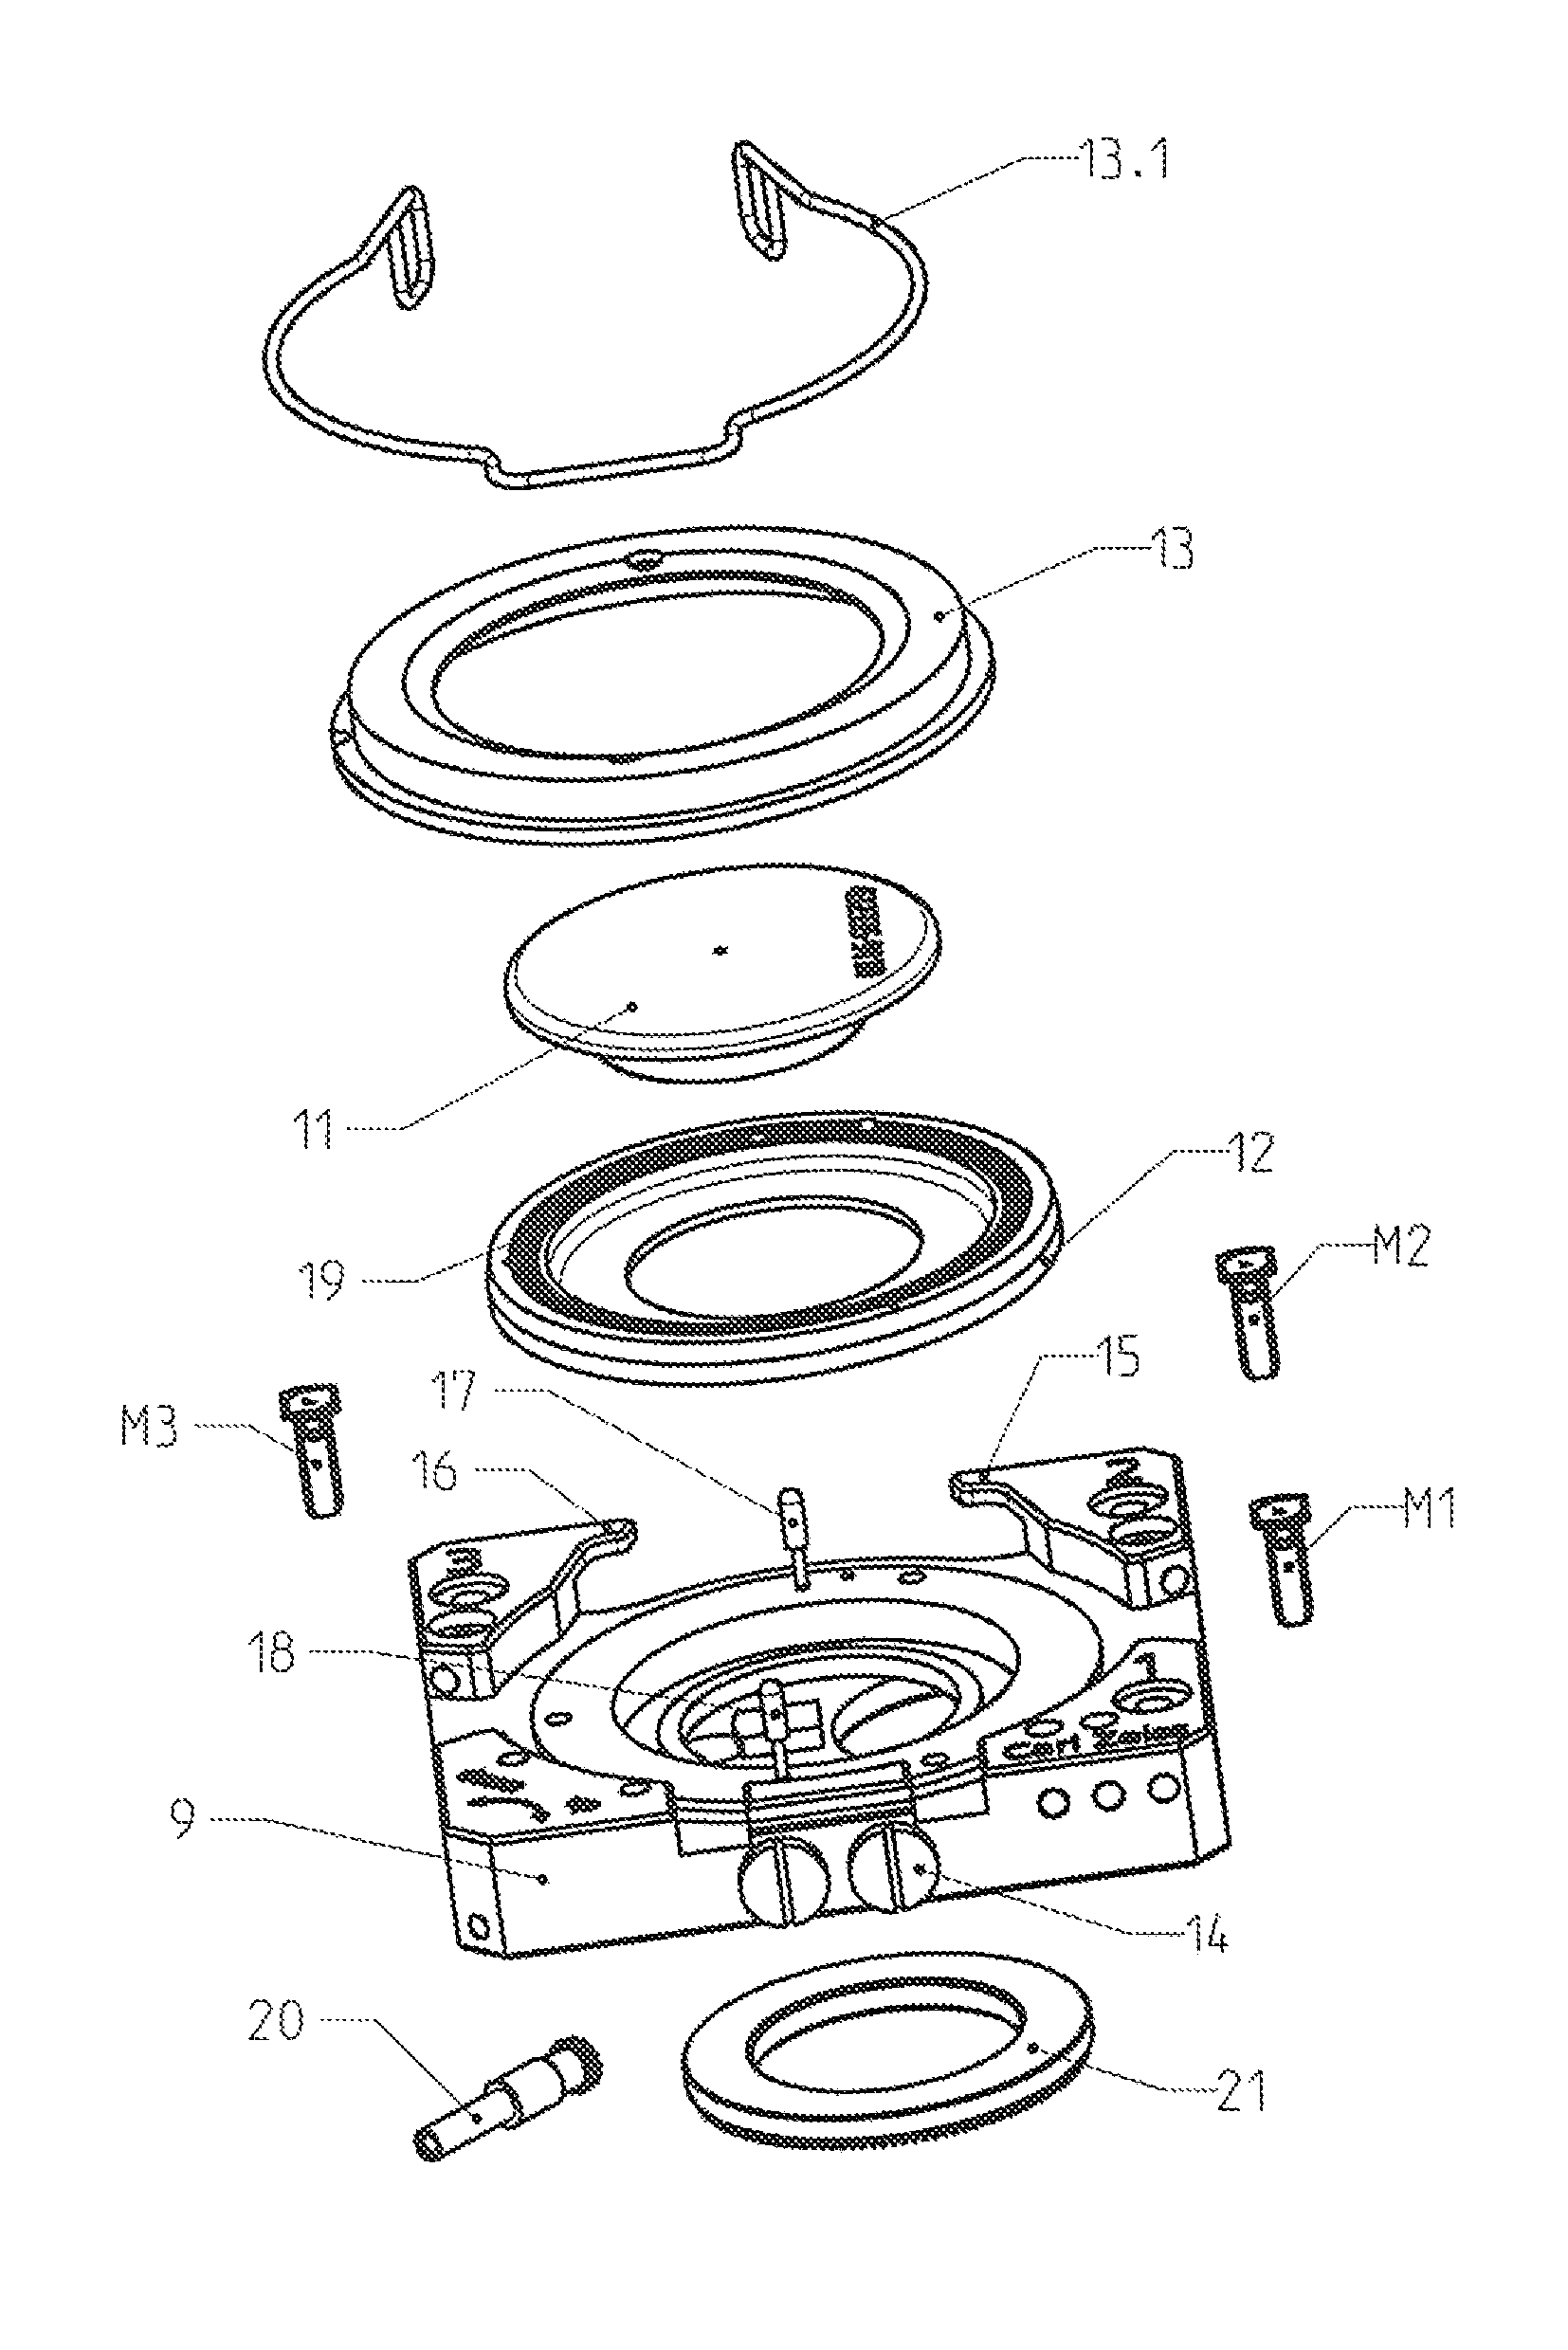 Filter holder for correlative particle analysis